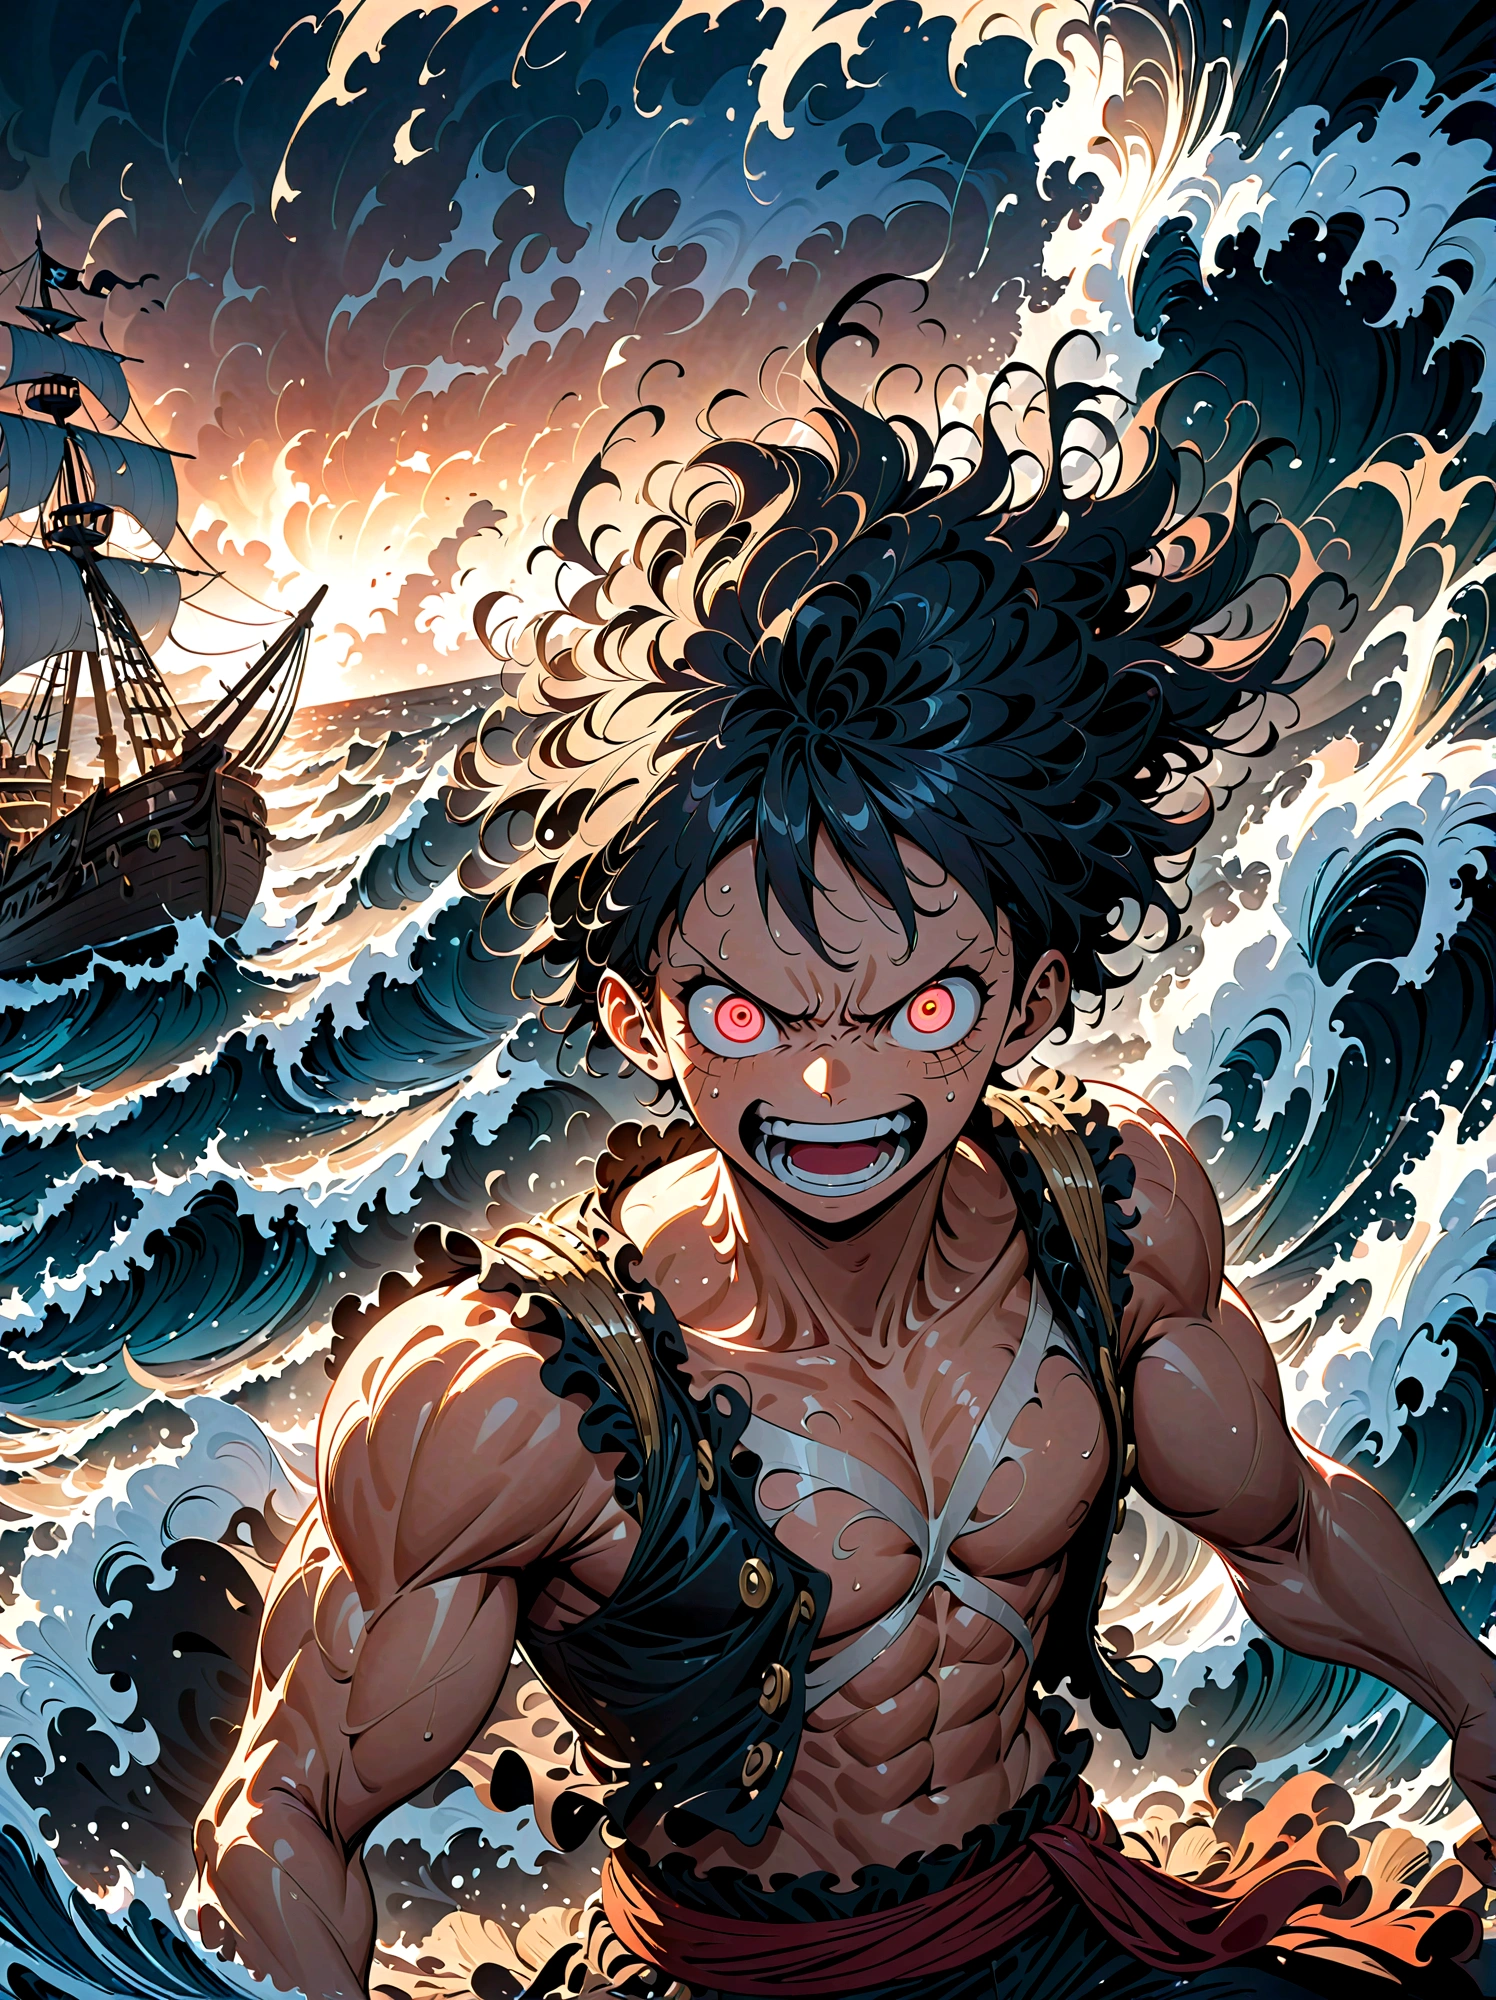 a powerful and energetic one piece character Luffy, with intense expression, burning determination and unyielding spirit, standing heroically on a pirate ship, surrounded by massive ocean waves, (best quality, 8k, highres, masterpiece:1.2), dynamic lighting, cinematic composition, dramatic color palette, striking pose, wild hairstyle, detailed facial features, glowing eyes, determined expression, muscular body, pirate outfit, sailing ship, crashing ocean waves, stormy sky, (epic,heroic:1.2)